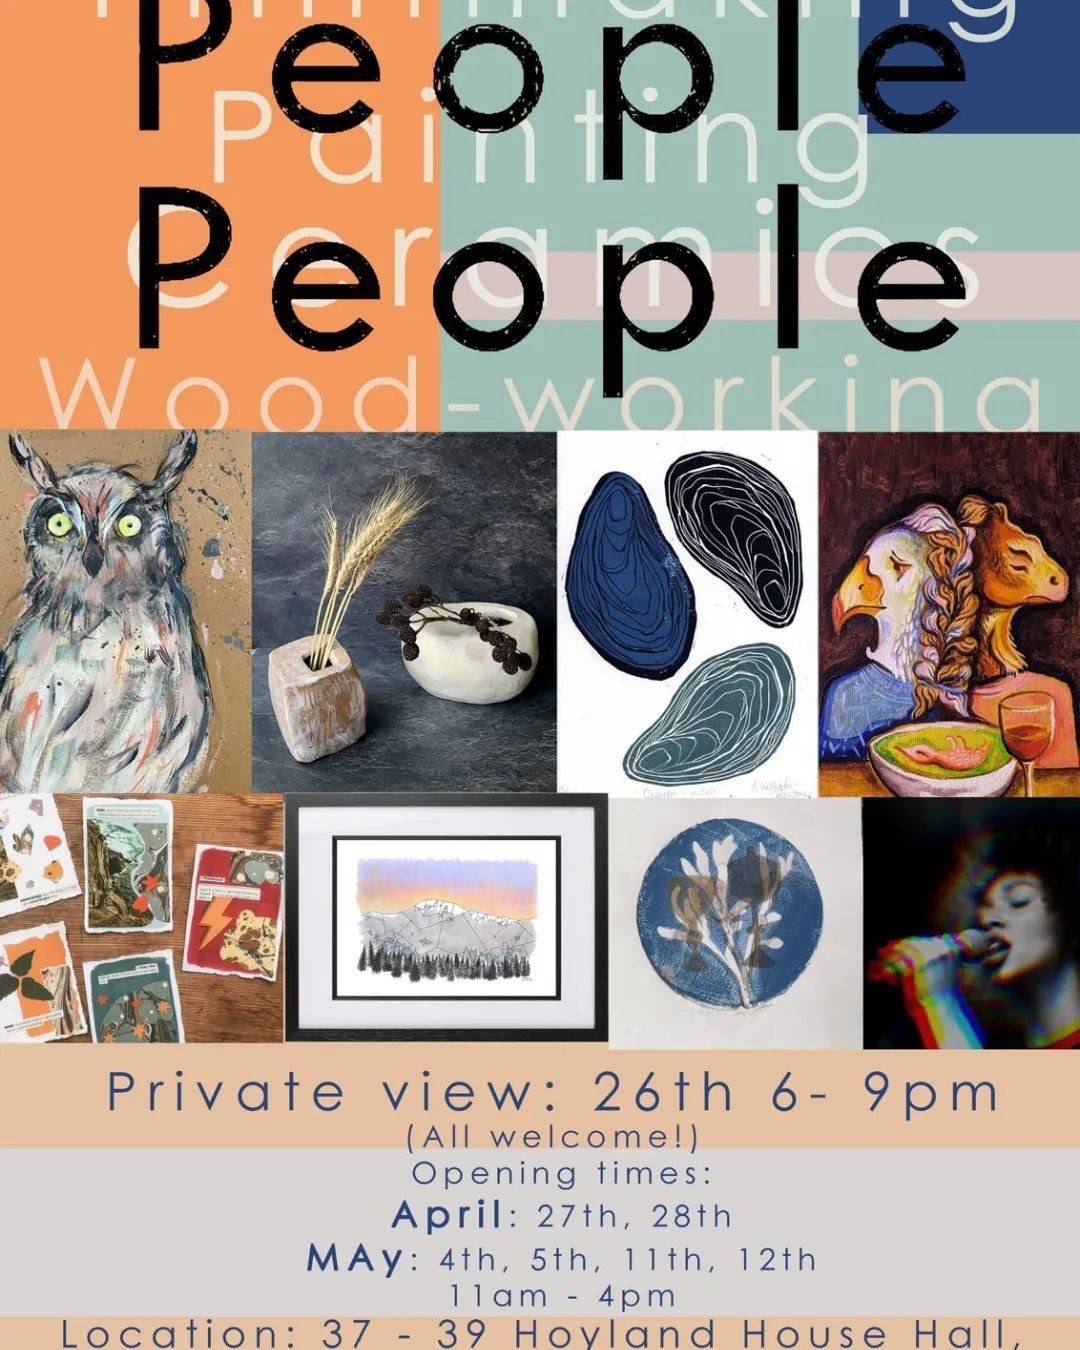 PEOPLE PEOPLE EXHIBITION
.
A collection of 18 artists are coming together for this group exhibition which starts with a prieview night next Friday 26th from 6-9pm. The exhibition will then continue on, open to the public over 3 weekends. All info abo